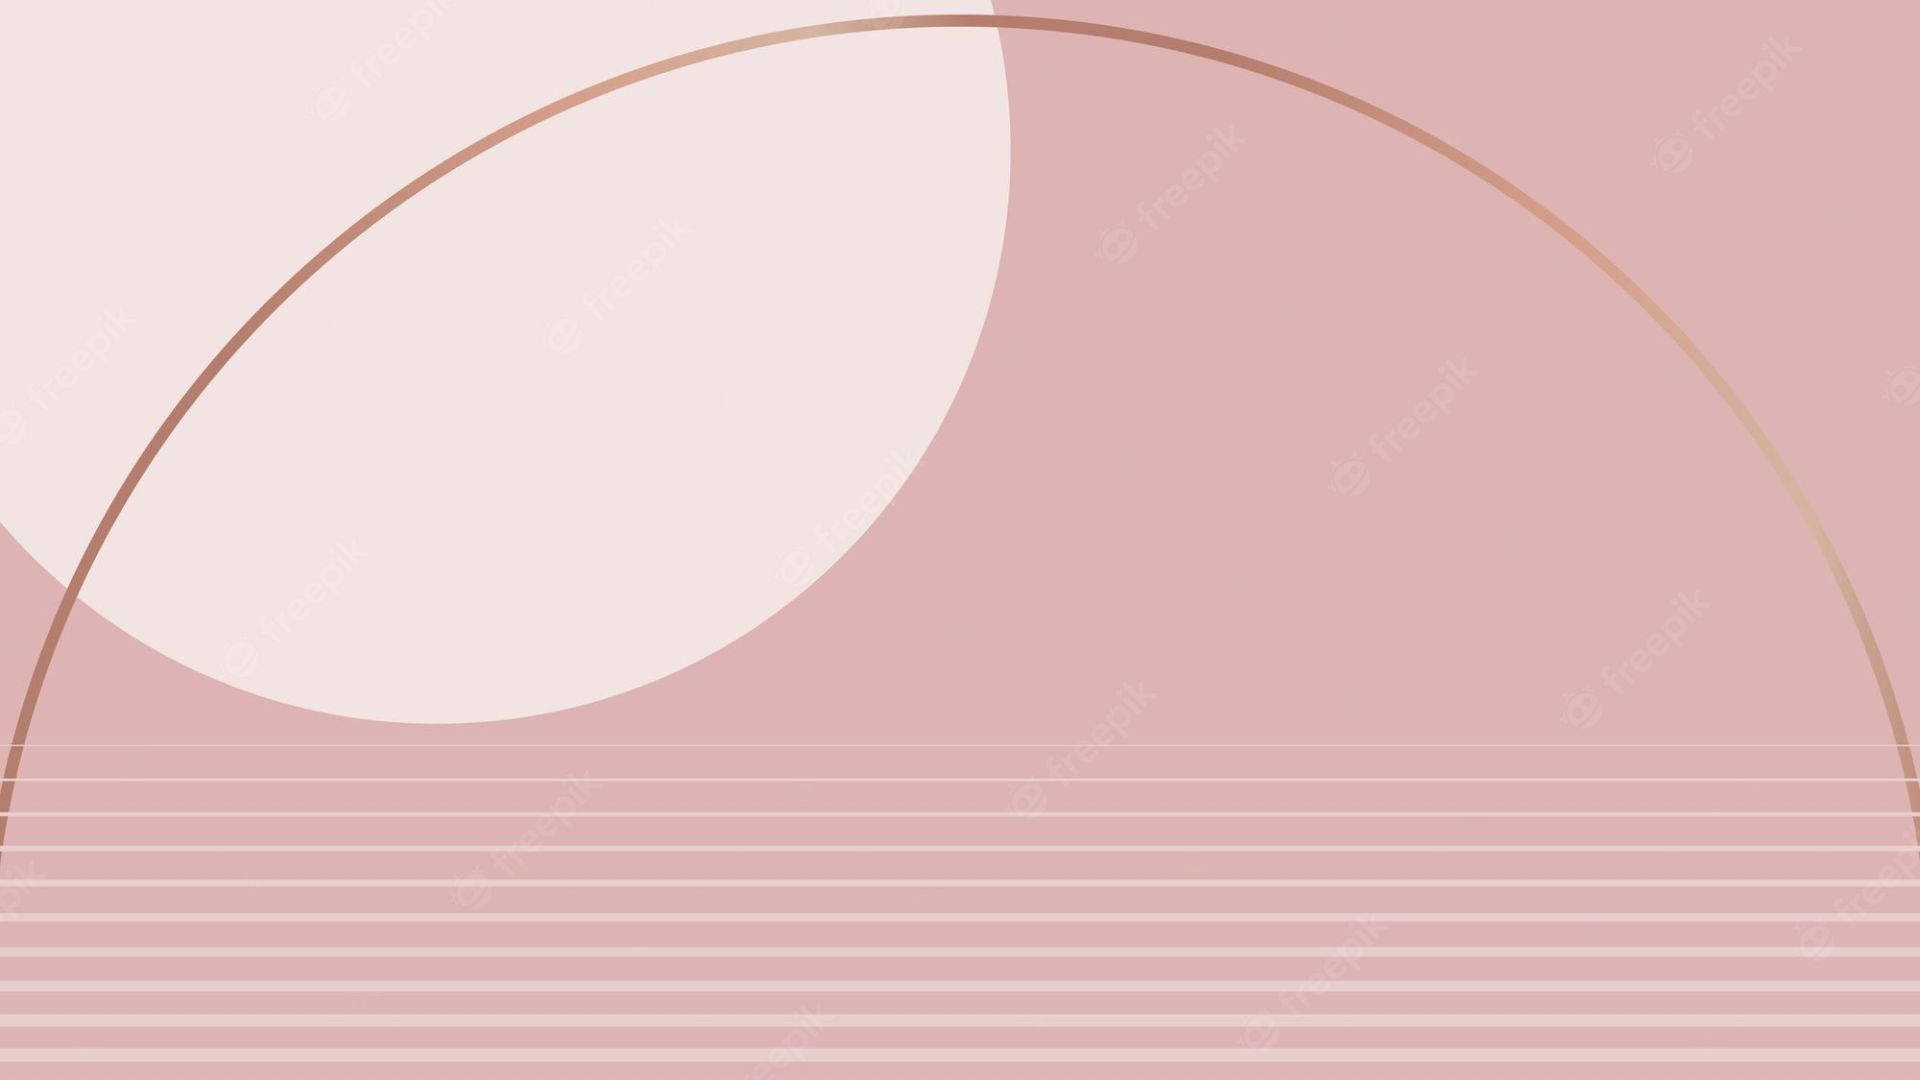 Circles On Aesthetic Pink Background